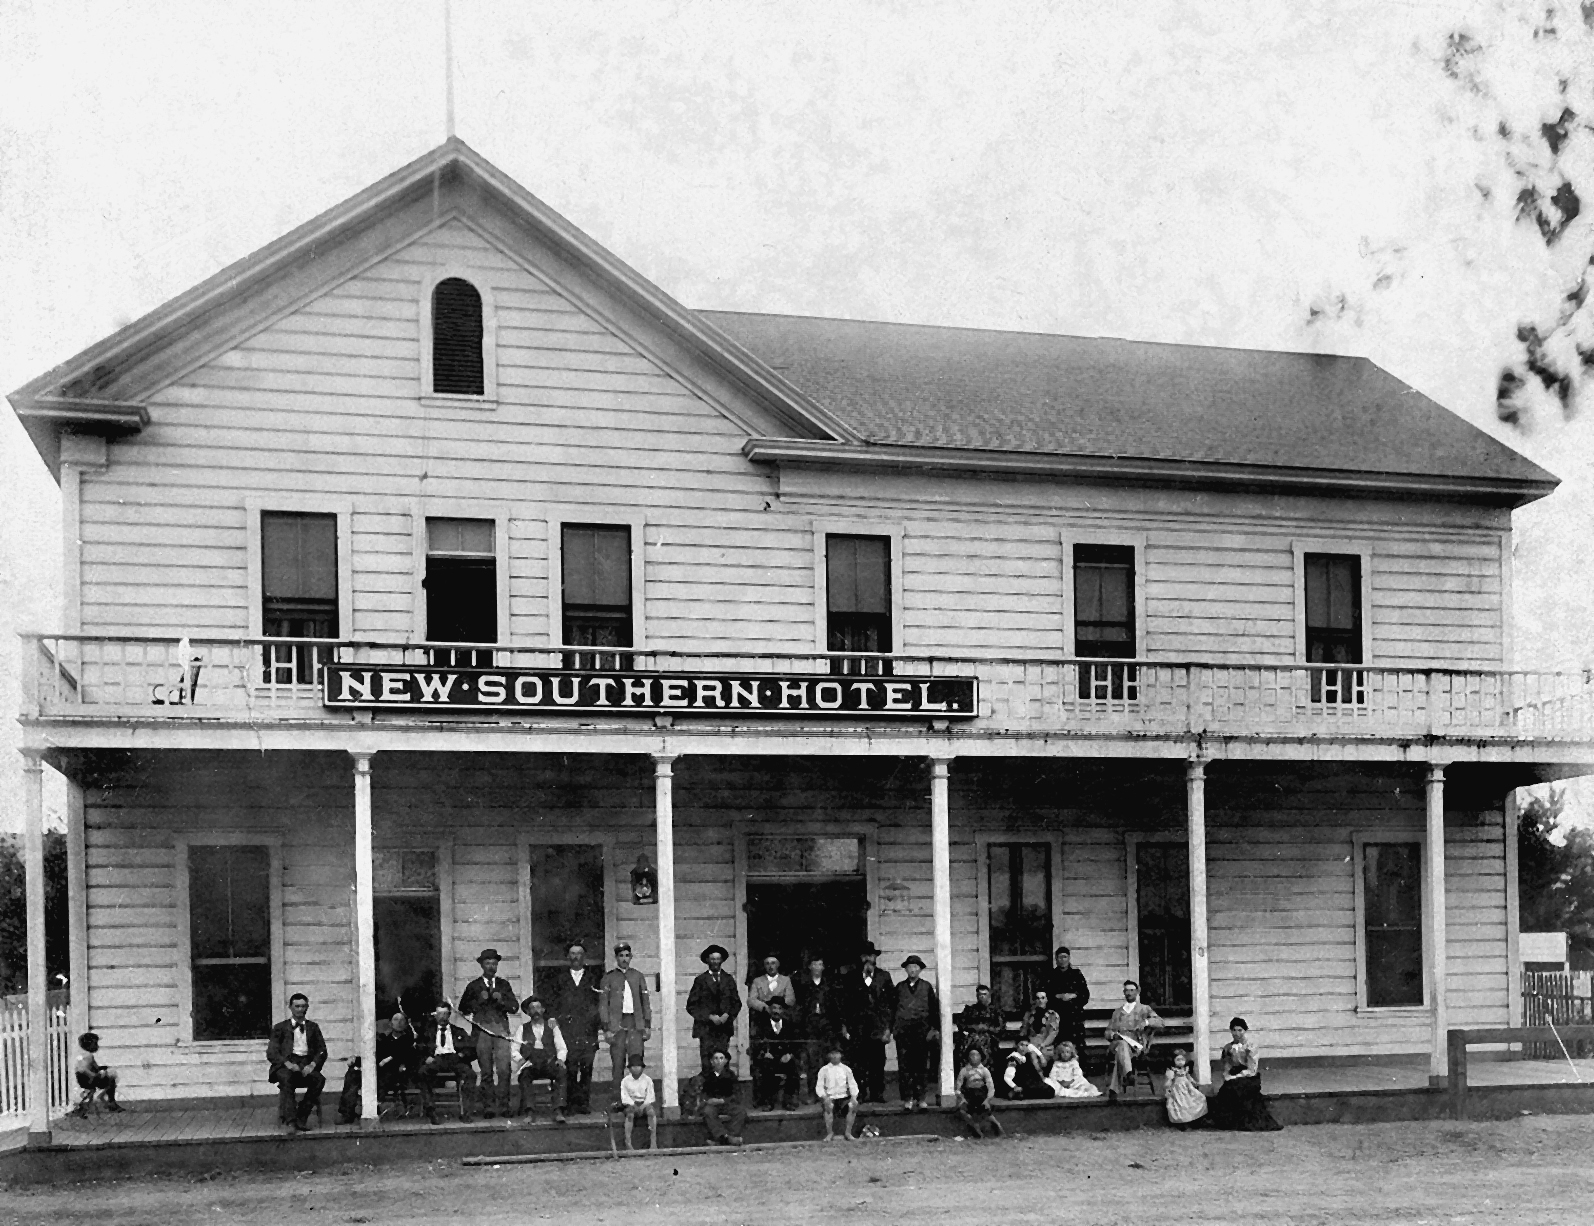 The Southern Hotel circa 1890